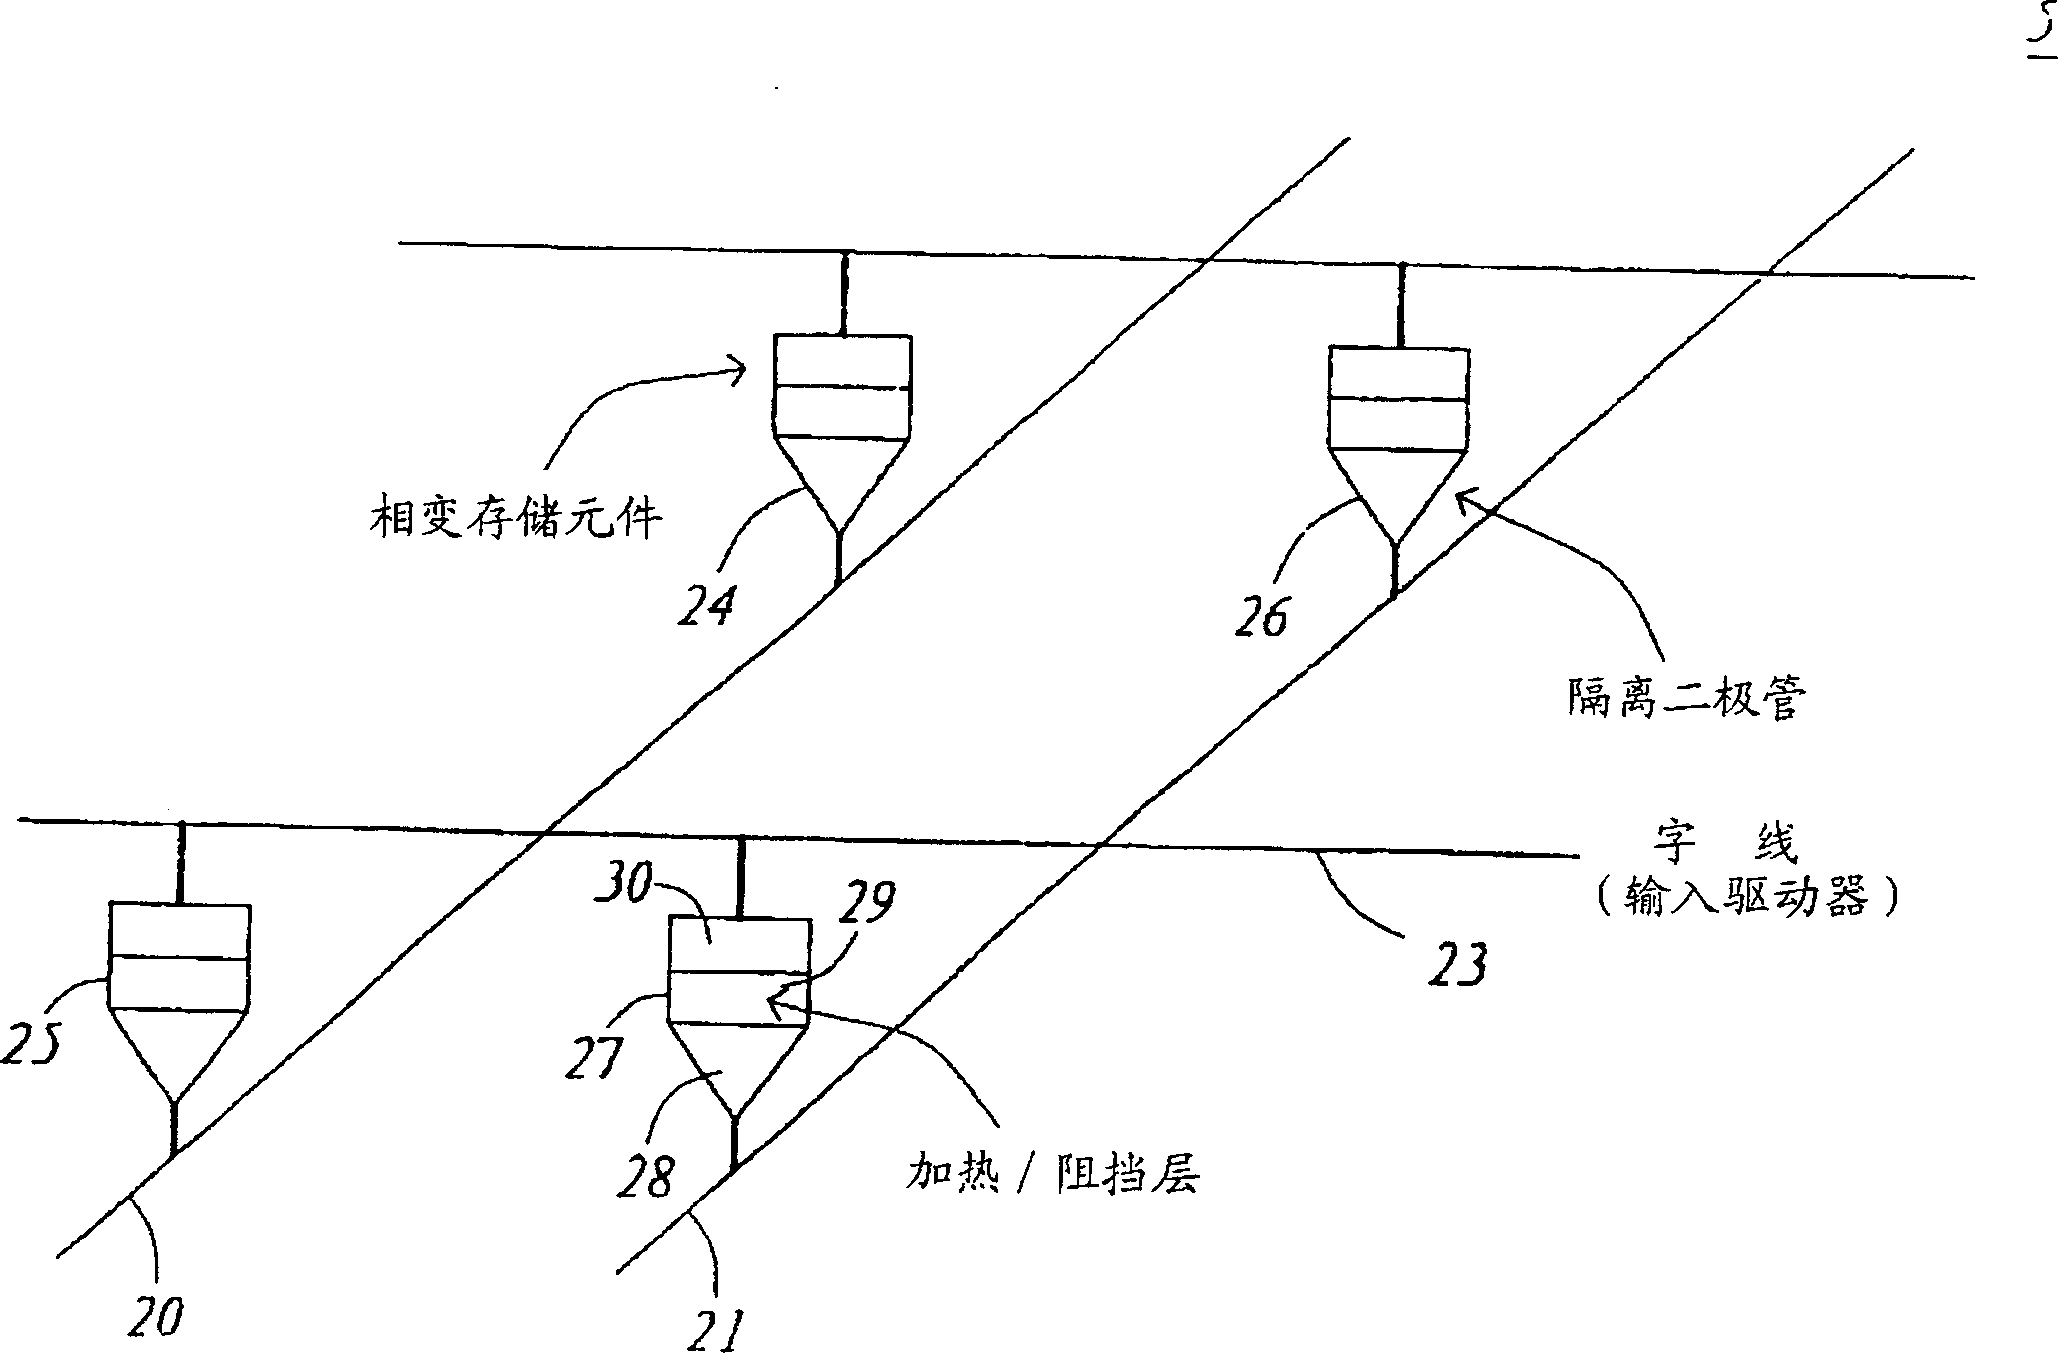 Self-aligned, programmable phase change memory and method for manufacturing the same